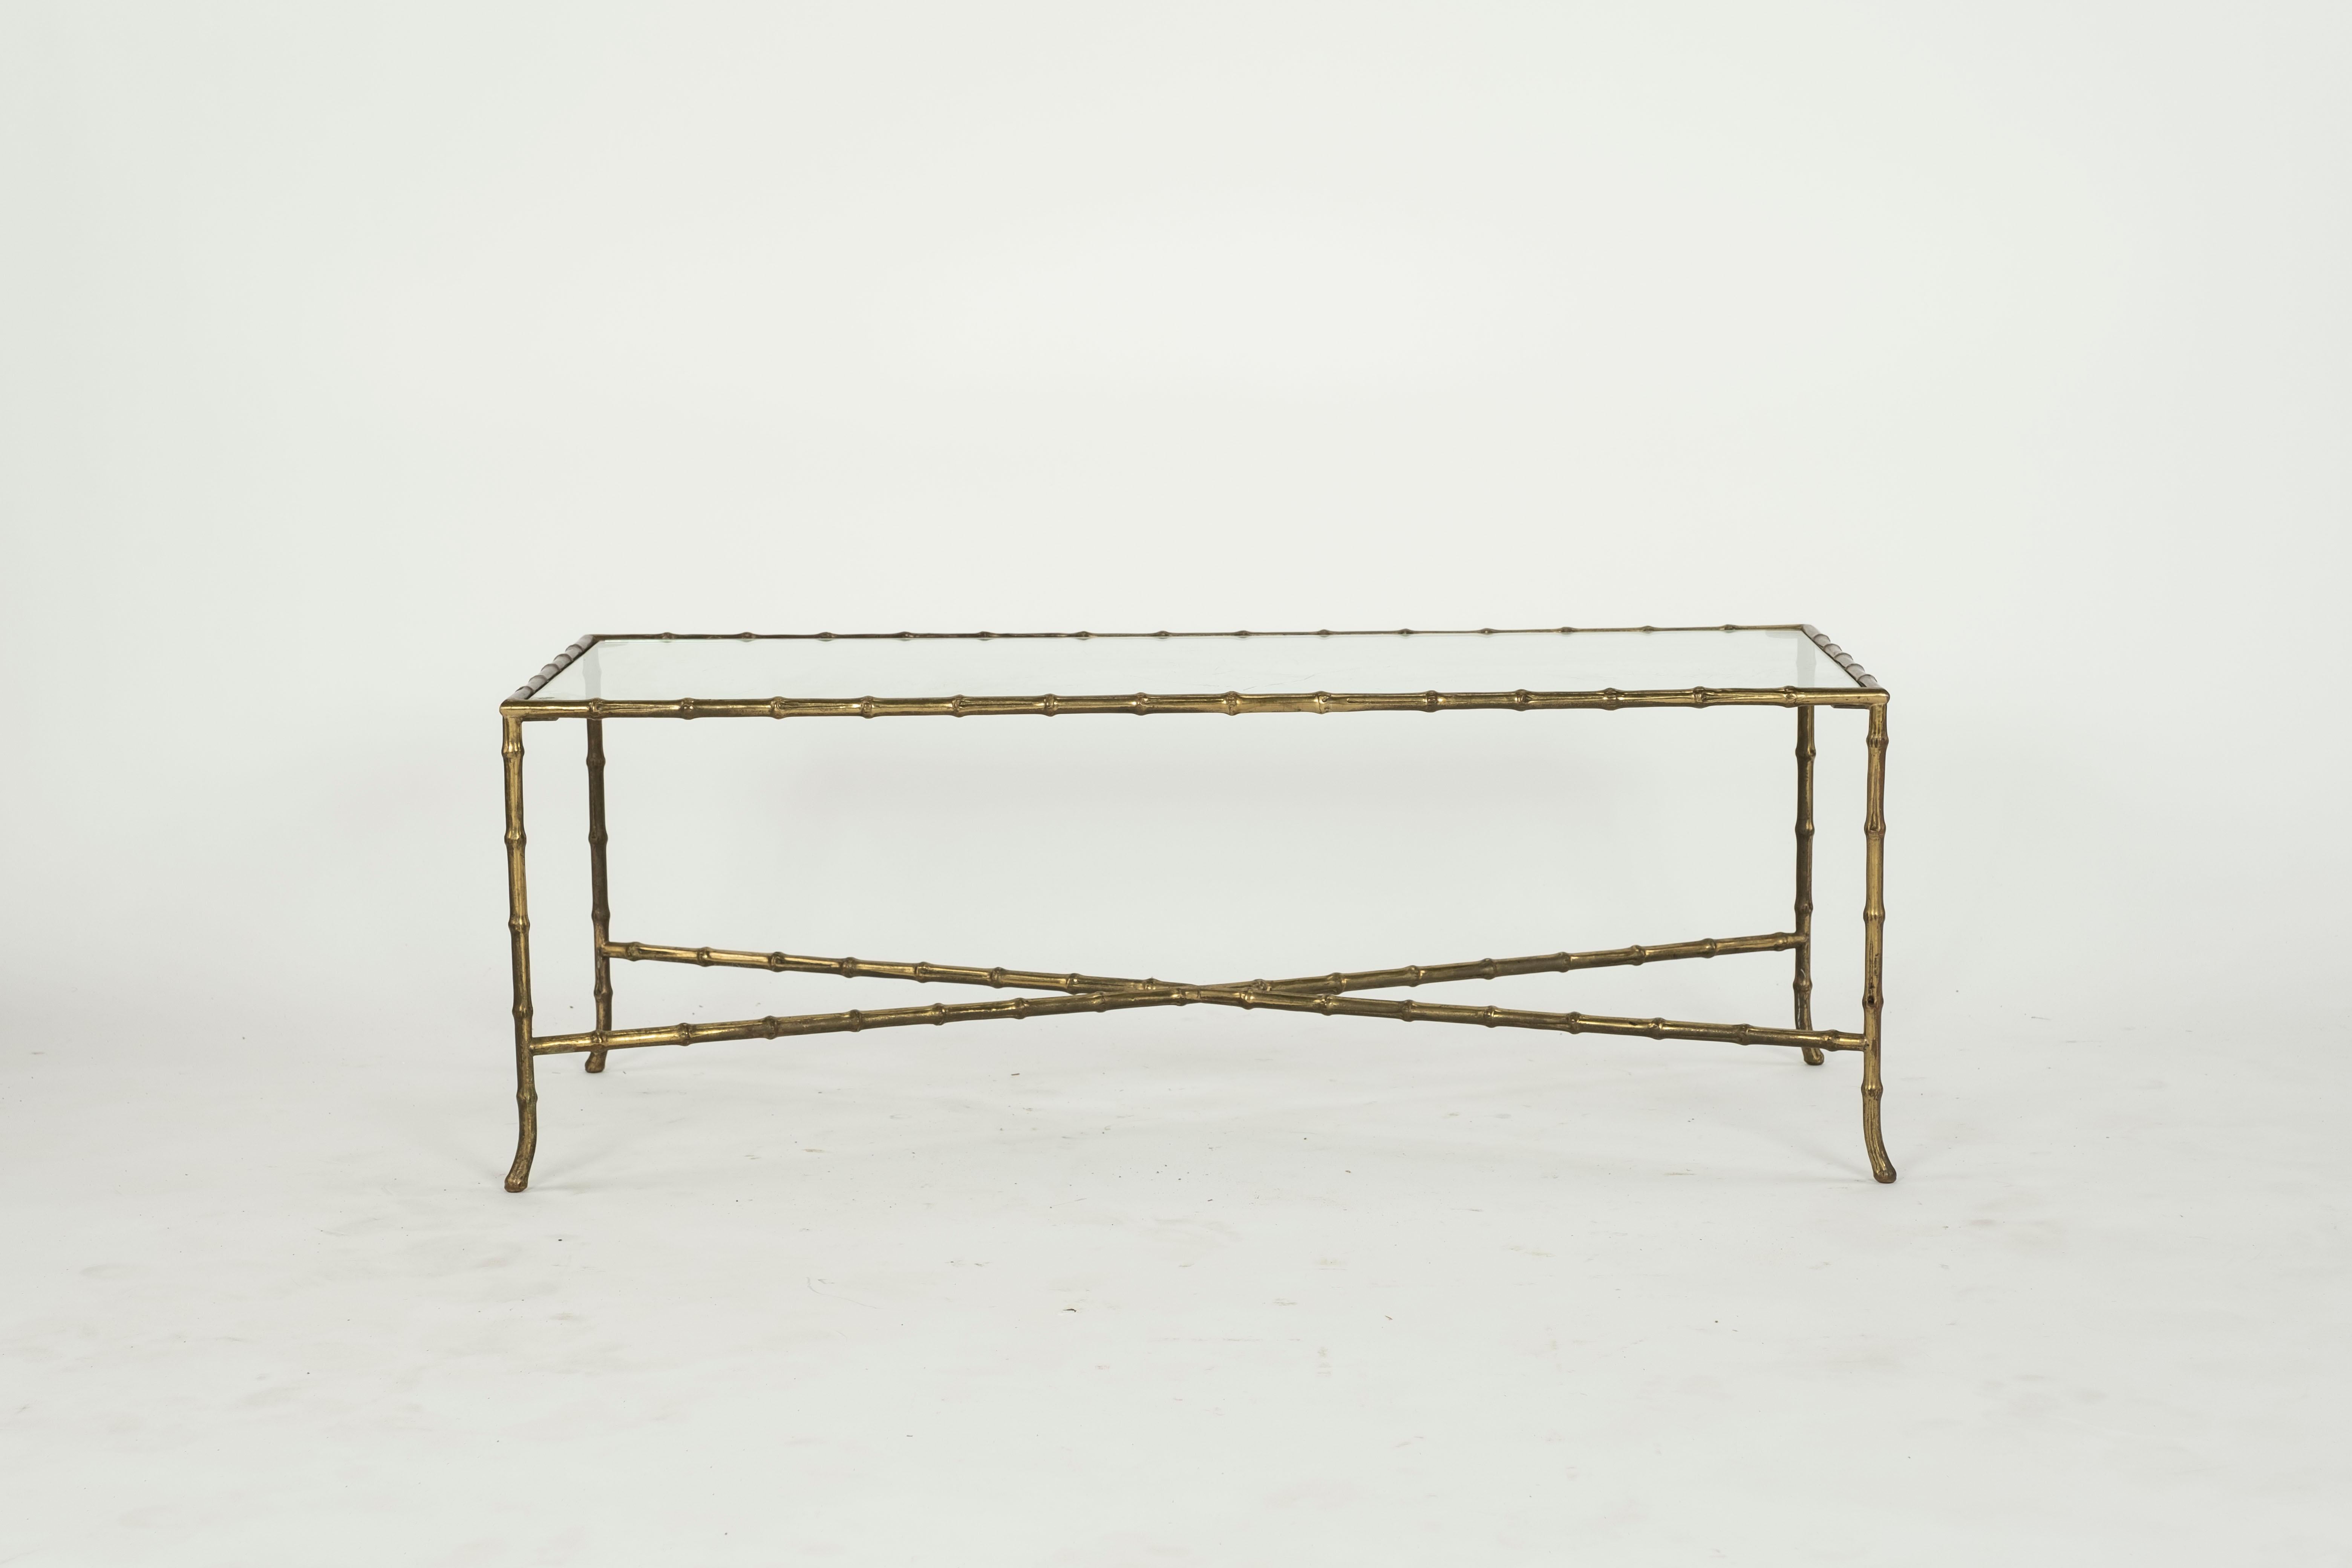 Maison Bagues brass and glass coffee table with faux bamboo design and slightly splayed foot at end. Glass has some scratch marks from previous use but perfectly usable.